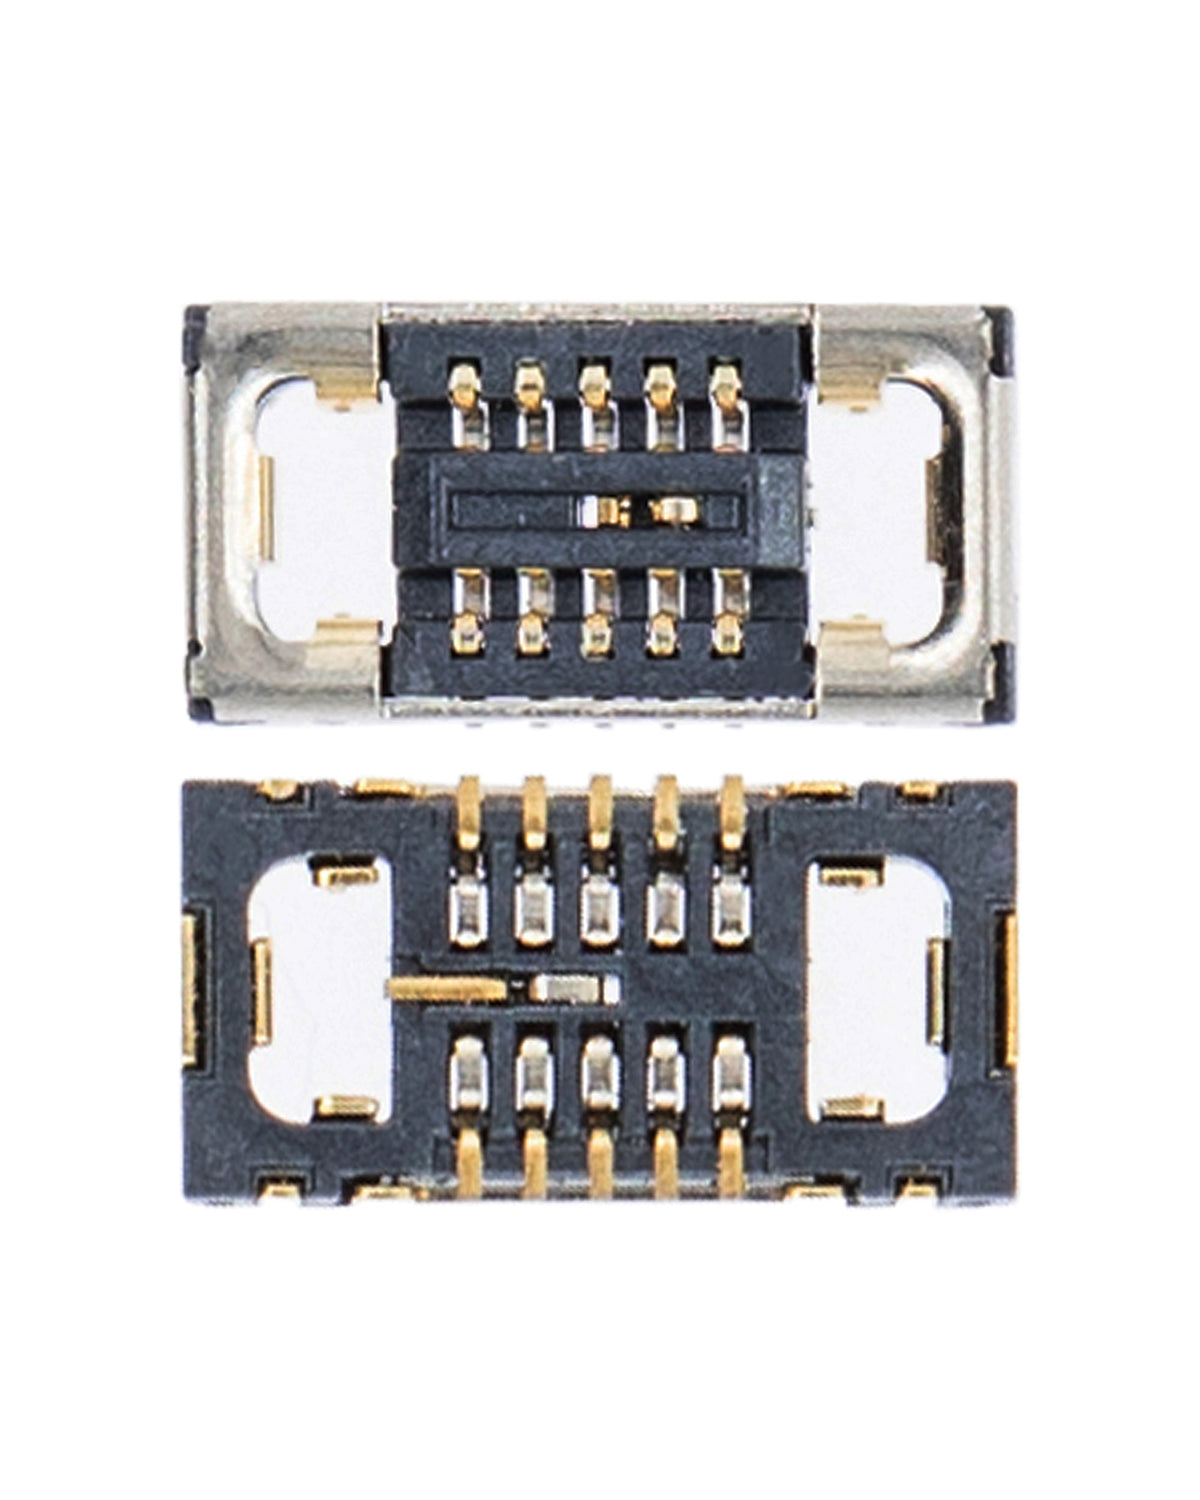 LOWER ANTENNA INTERFACE COMPATIBLE WITH IPHONE 11 / 11 PRO / 11 PRO MAX (J_LAT_K,10 PINS)